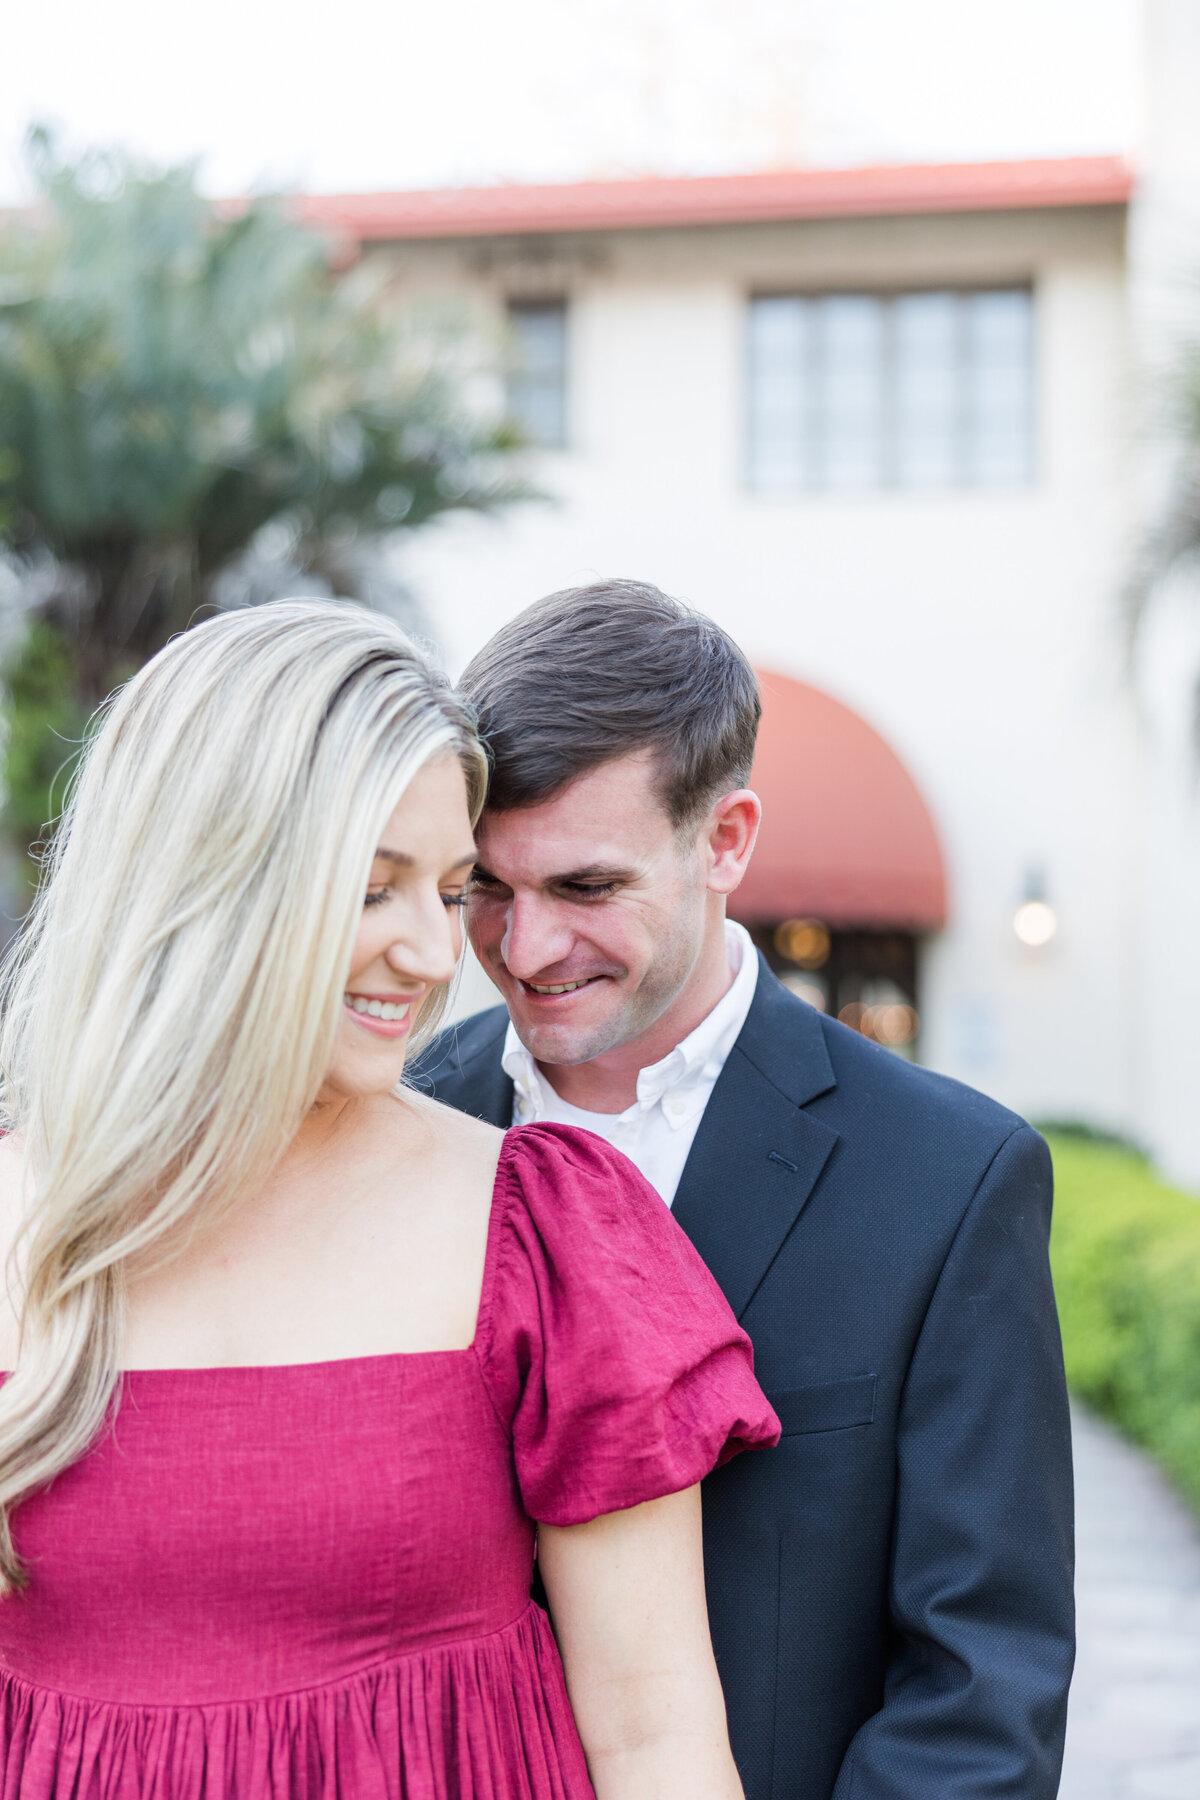 Mary Warren Engagement Session - Taylor'd Southern Events - Florida Wedding Photographer-0521